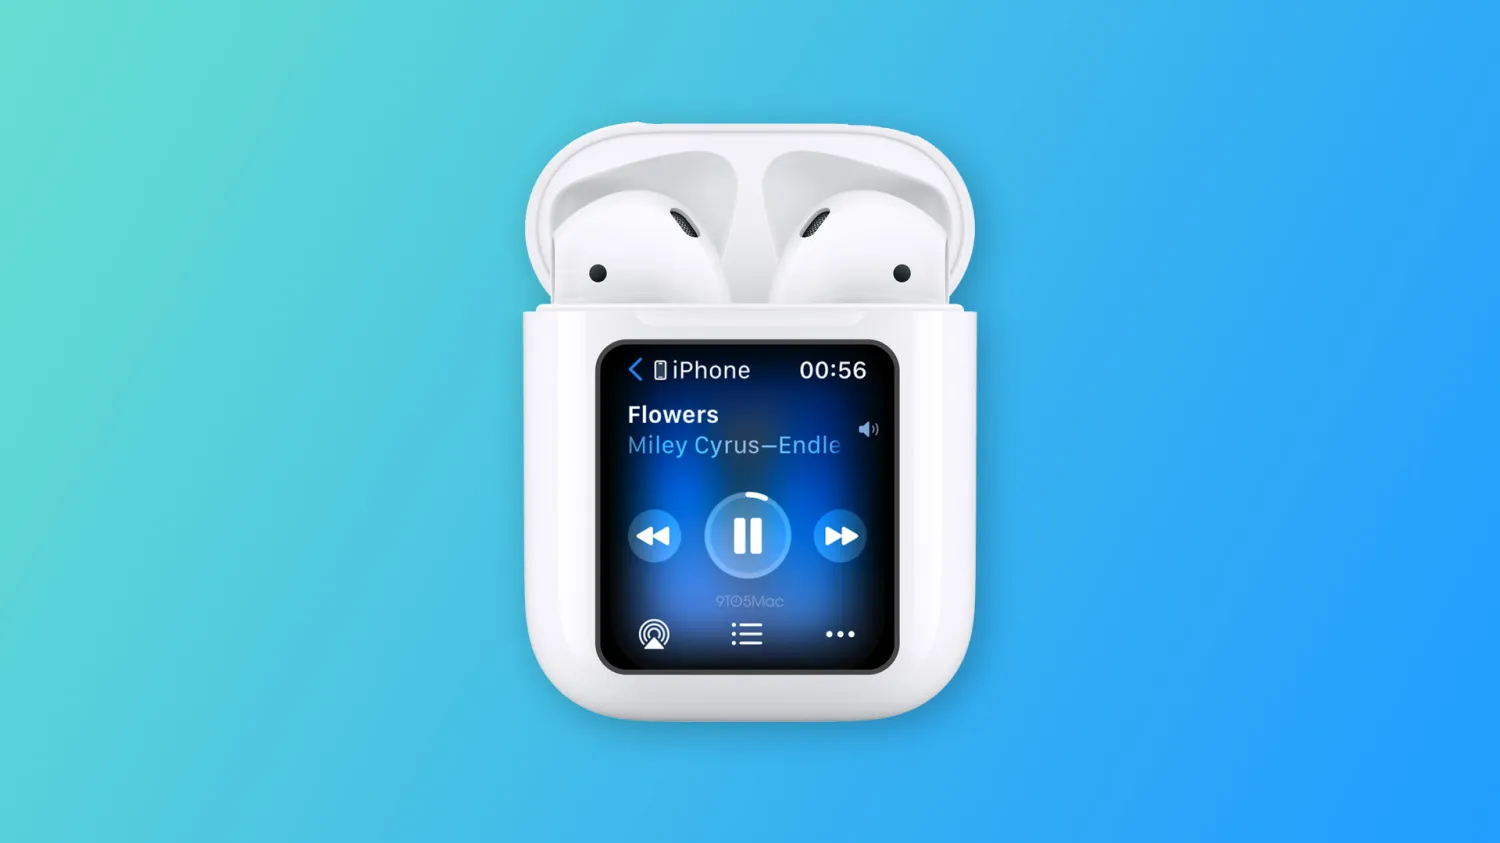 Your Future AirPods Case May Look a Lot Like a Modern iPod Nano